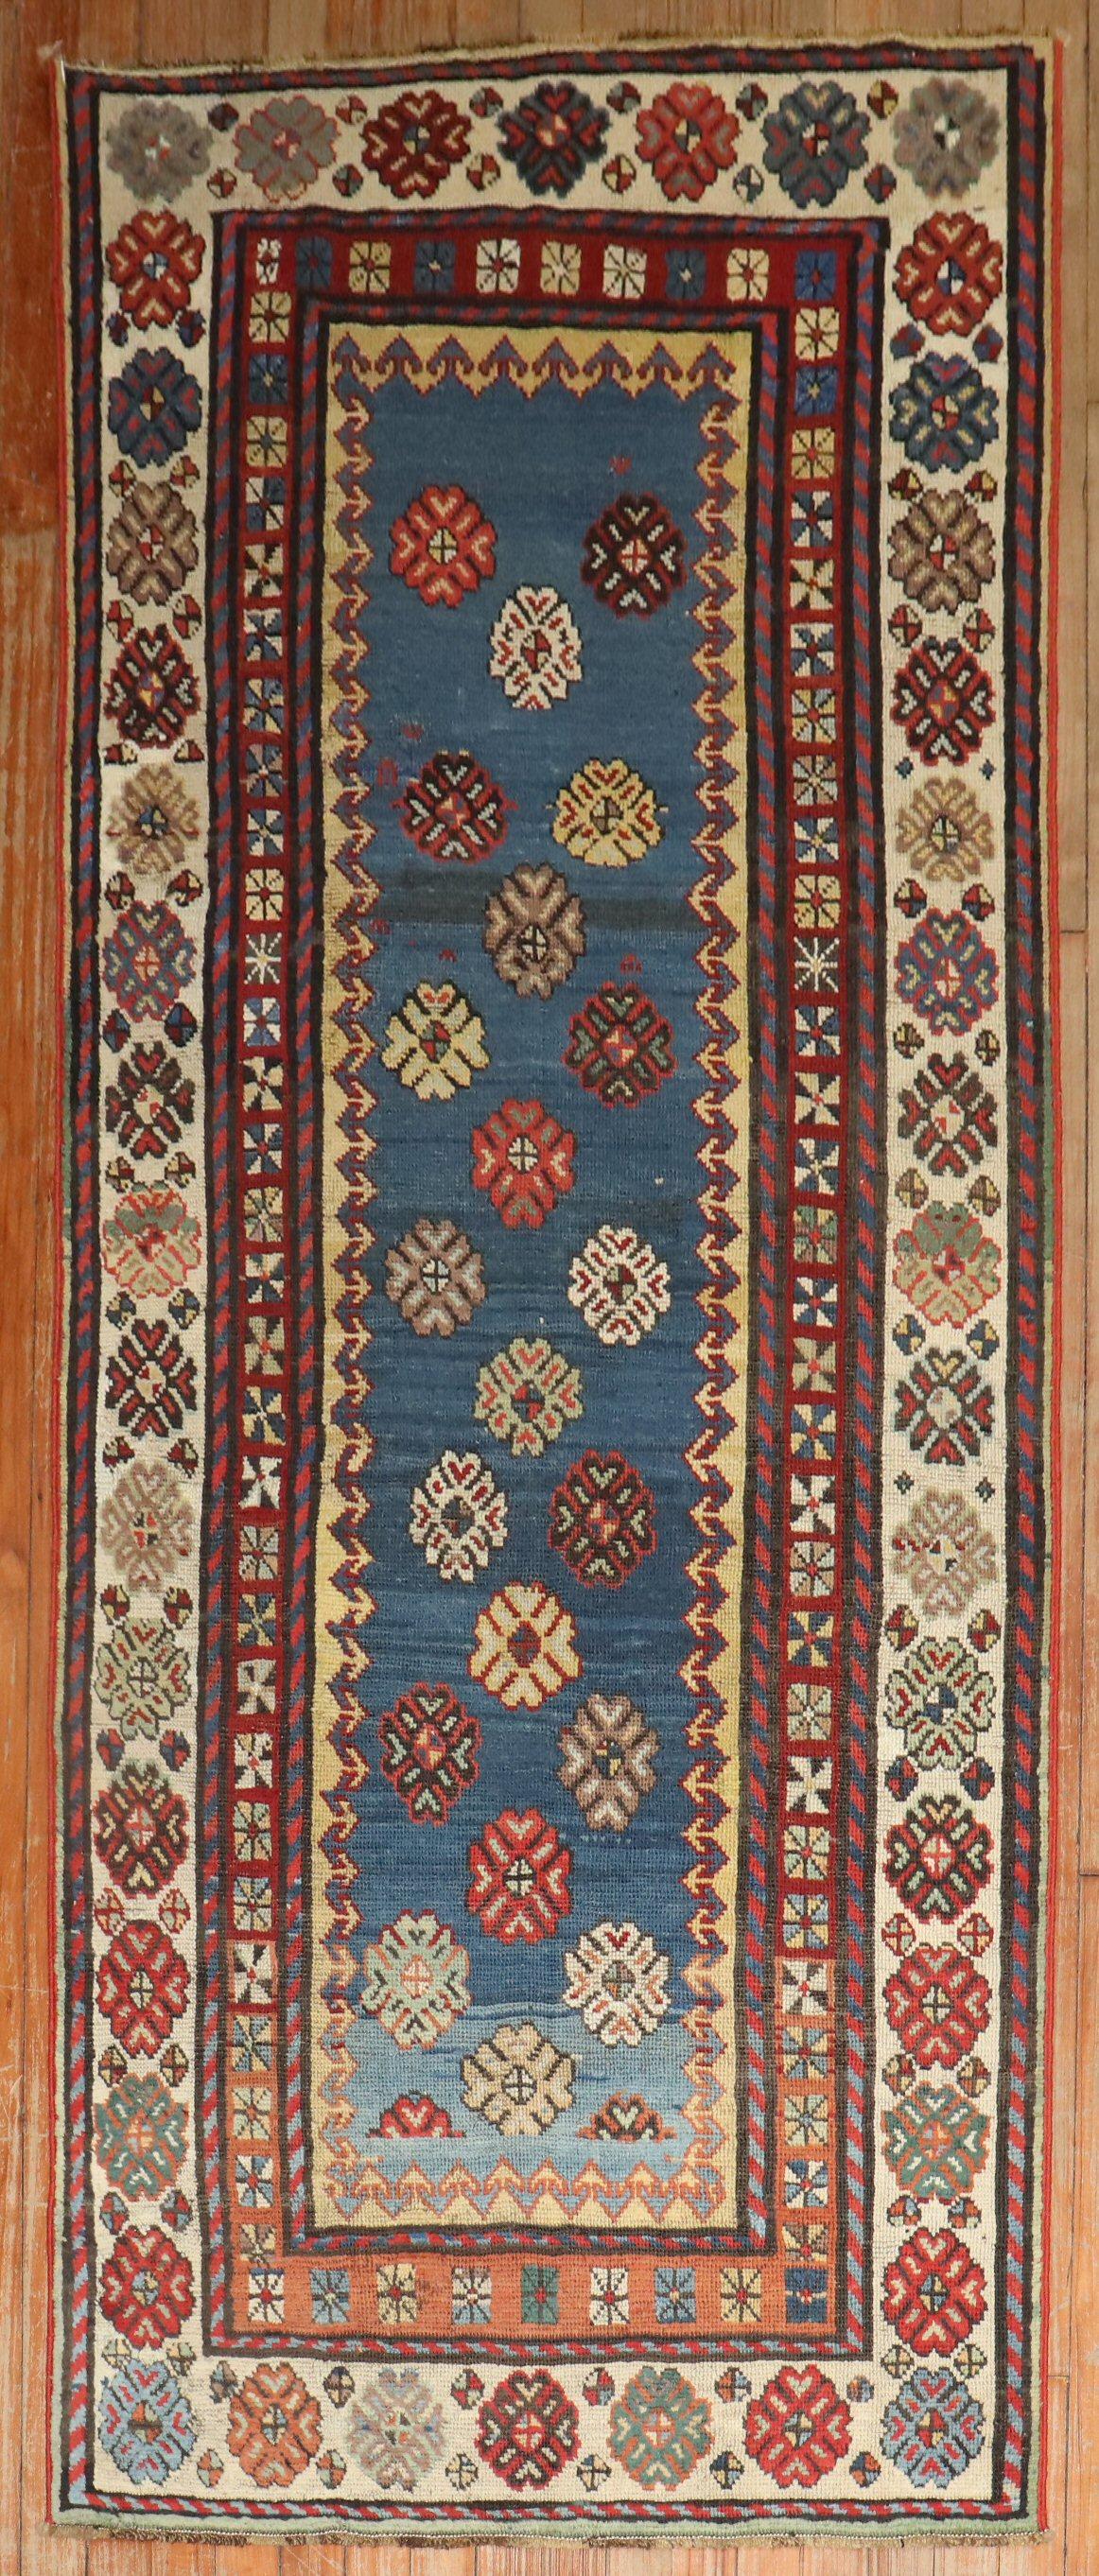 A late 19th-century Caucasian Tribal Talish Runner

Measures: 2'11